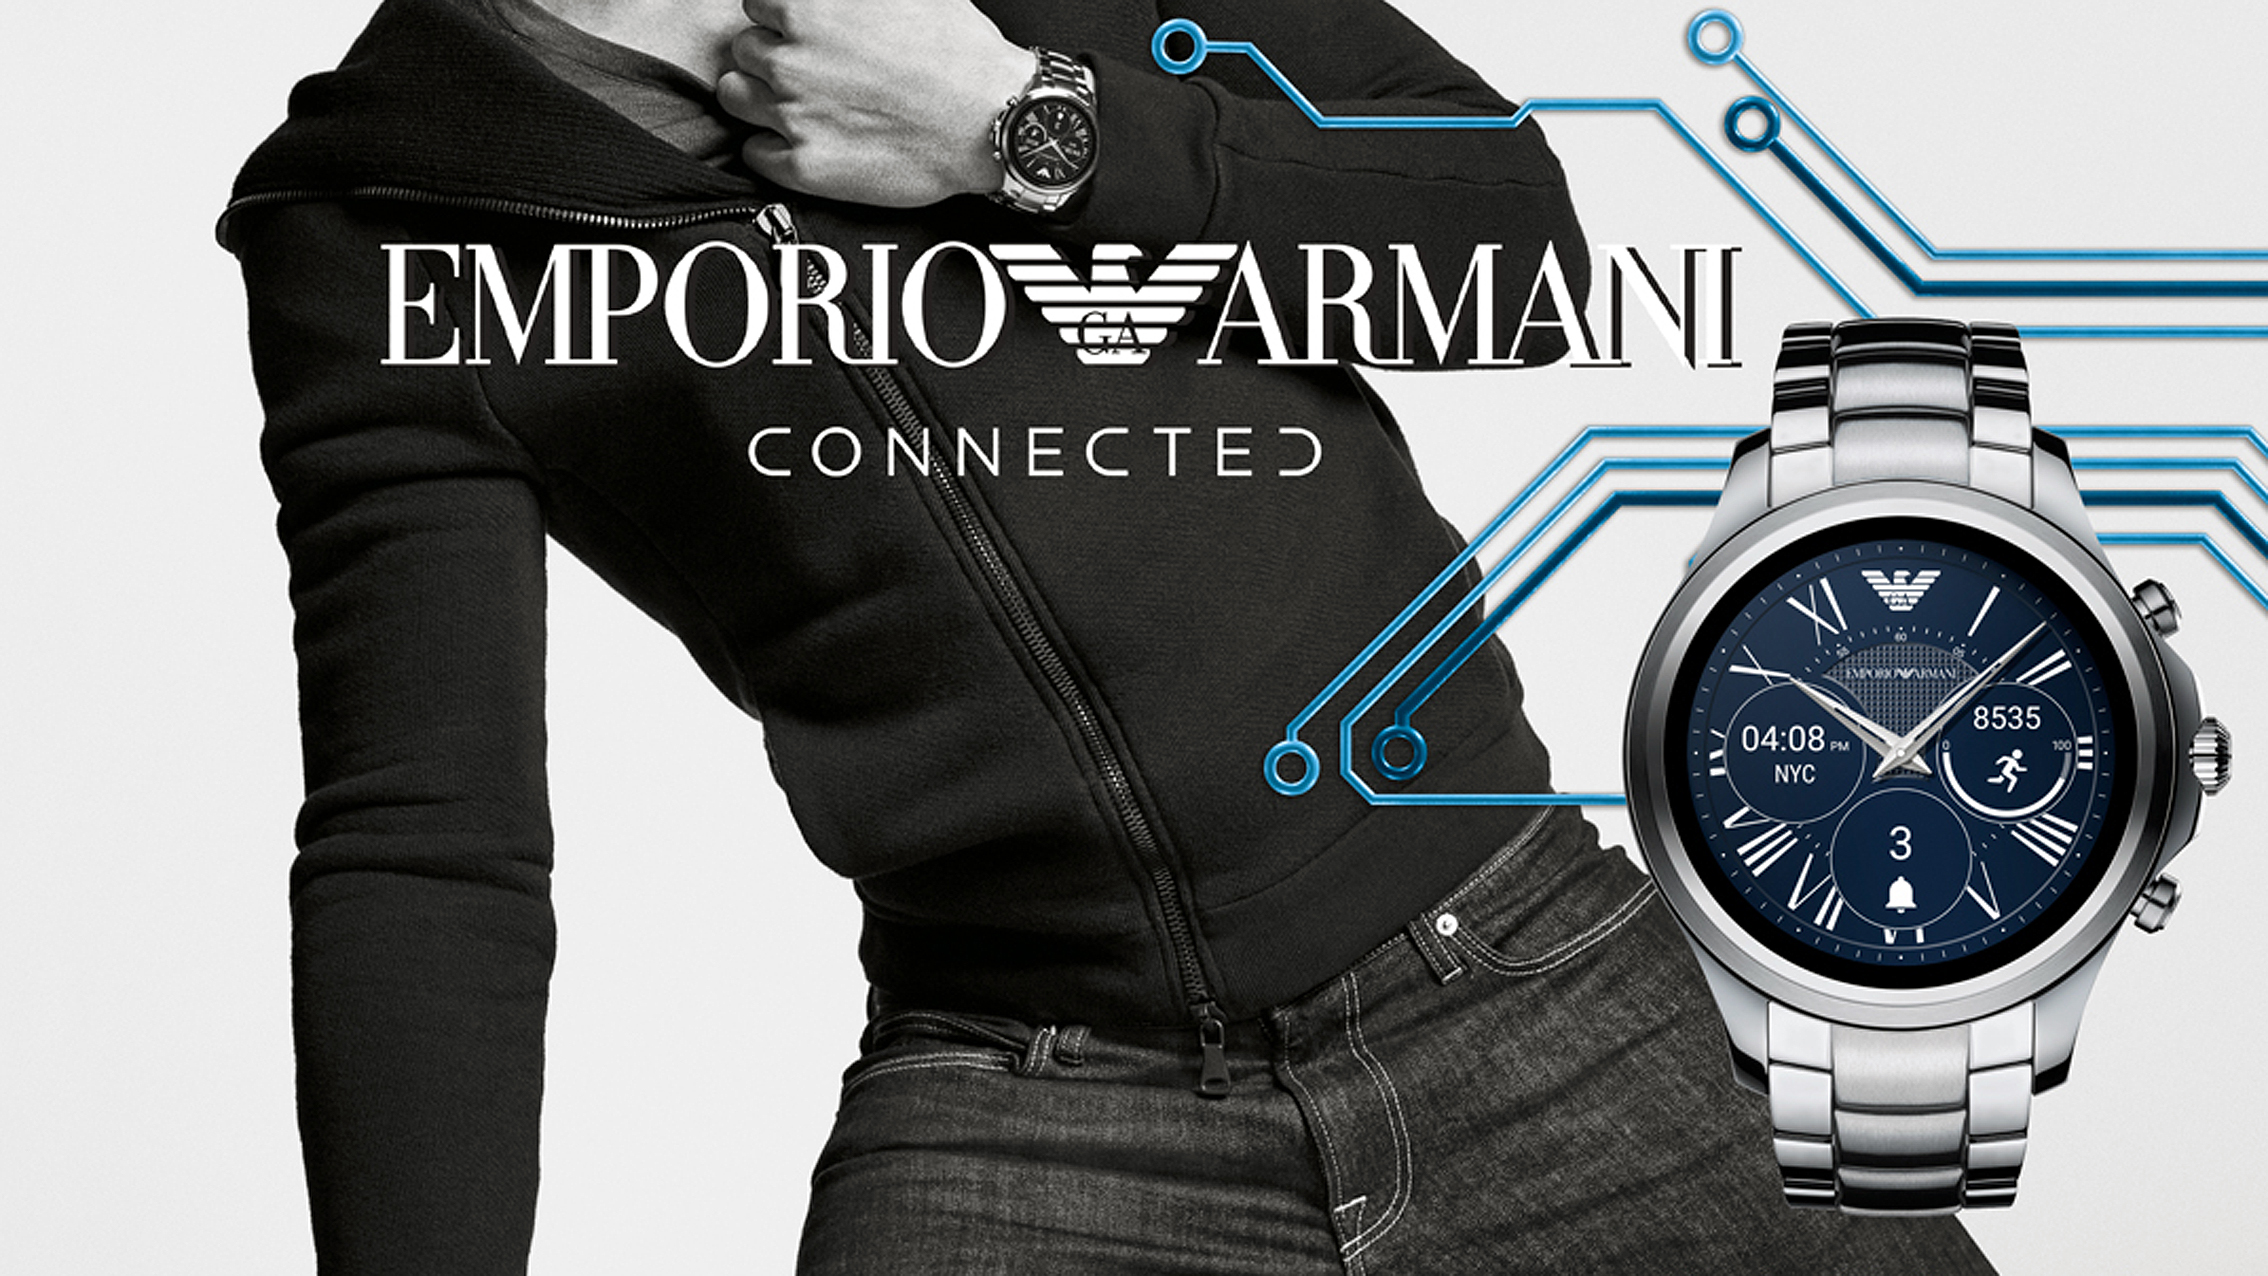 armani touch screen watch